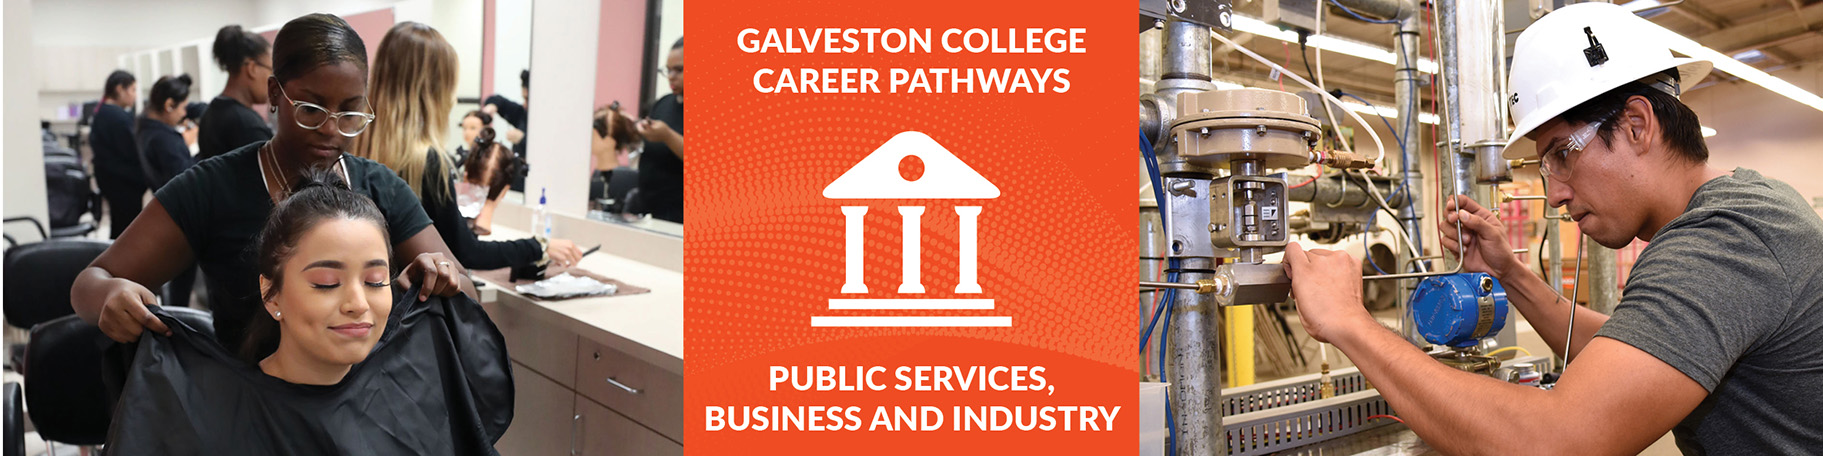 GC Public Services, Business and Industry Pathway 